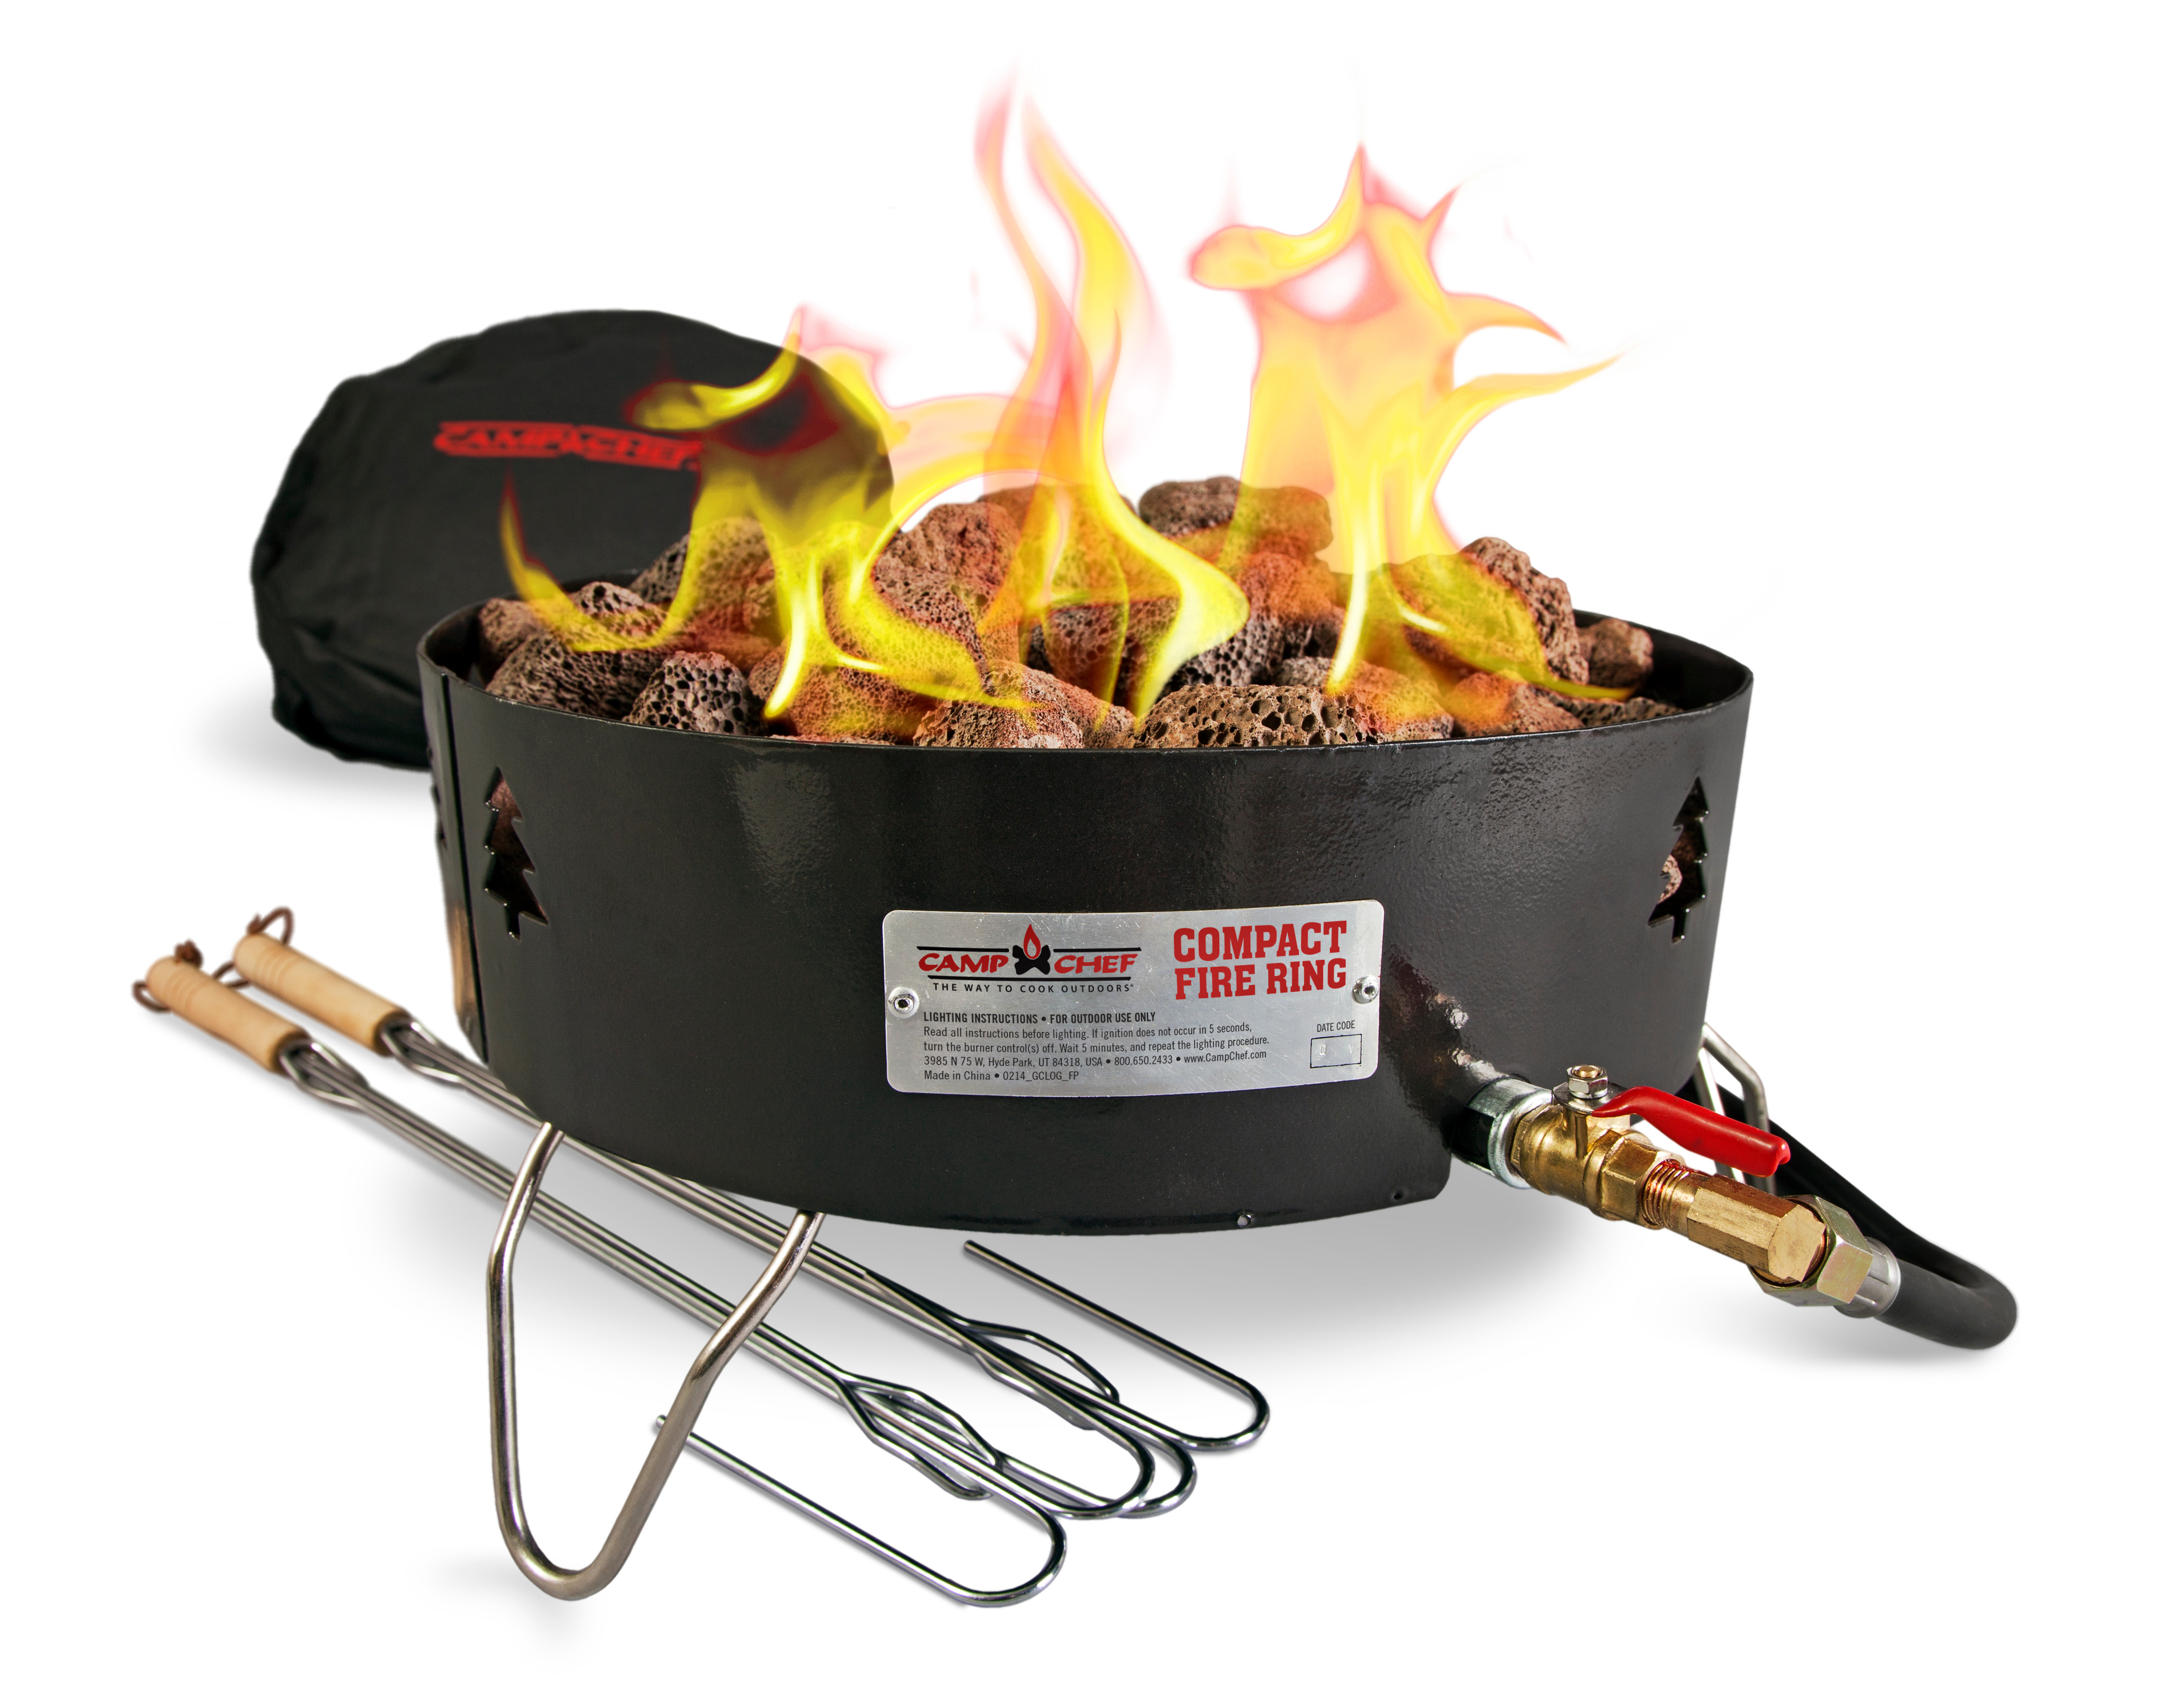 Camp Chef Campfire Pit Portablepropane Gc Log Walmart in proportions 4689 X 3634